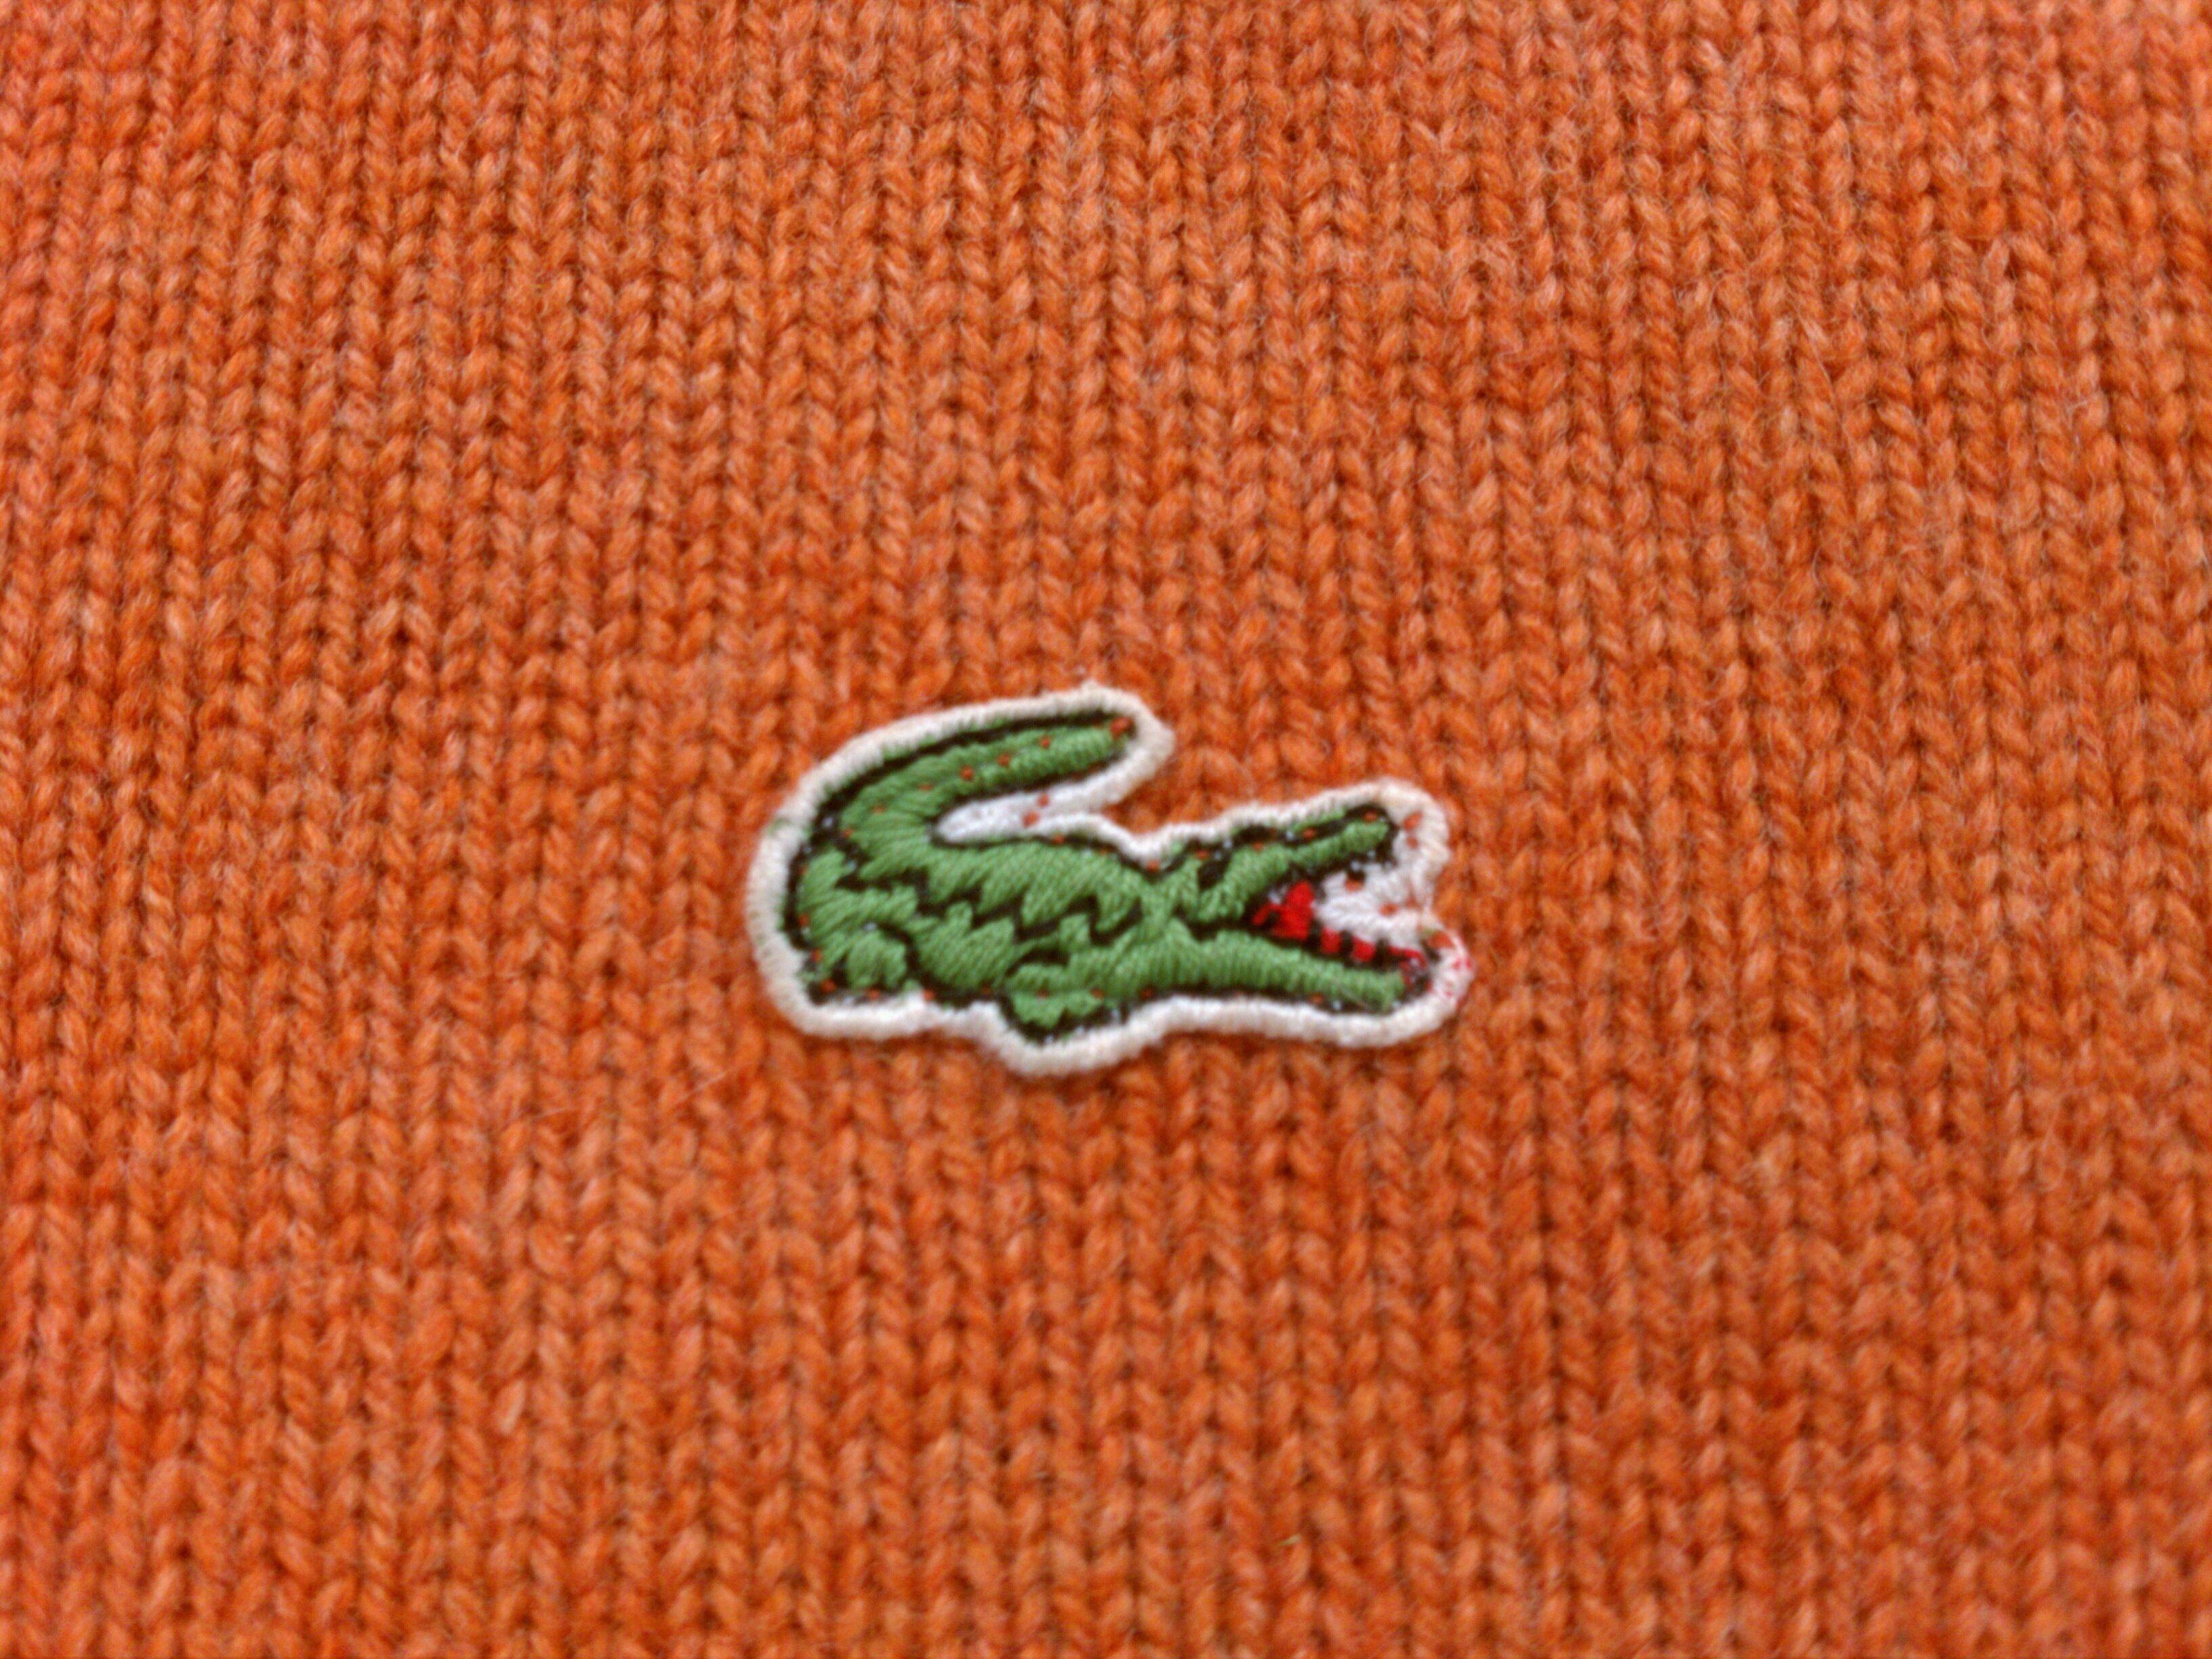 Izod Clothing Logo - Of A Crocodile In The Wrong Place | Thrift Store Preppy